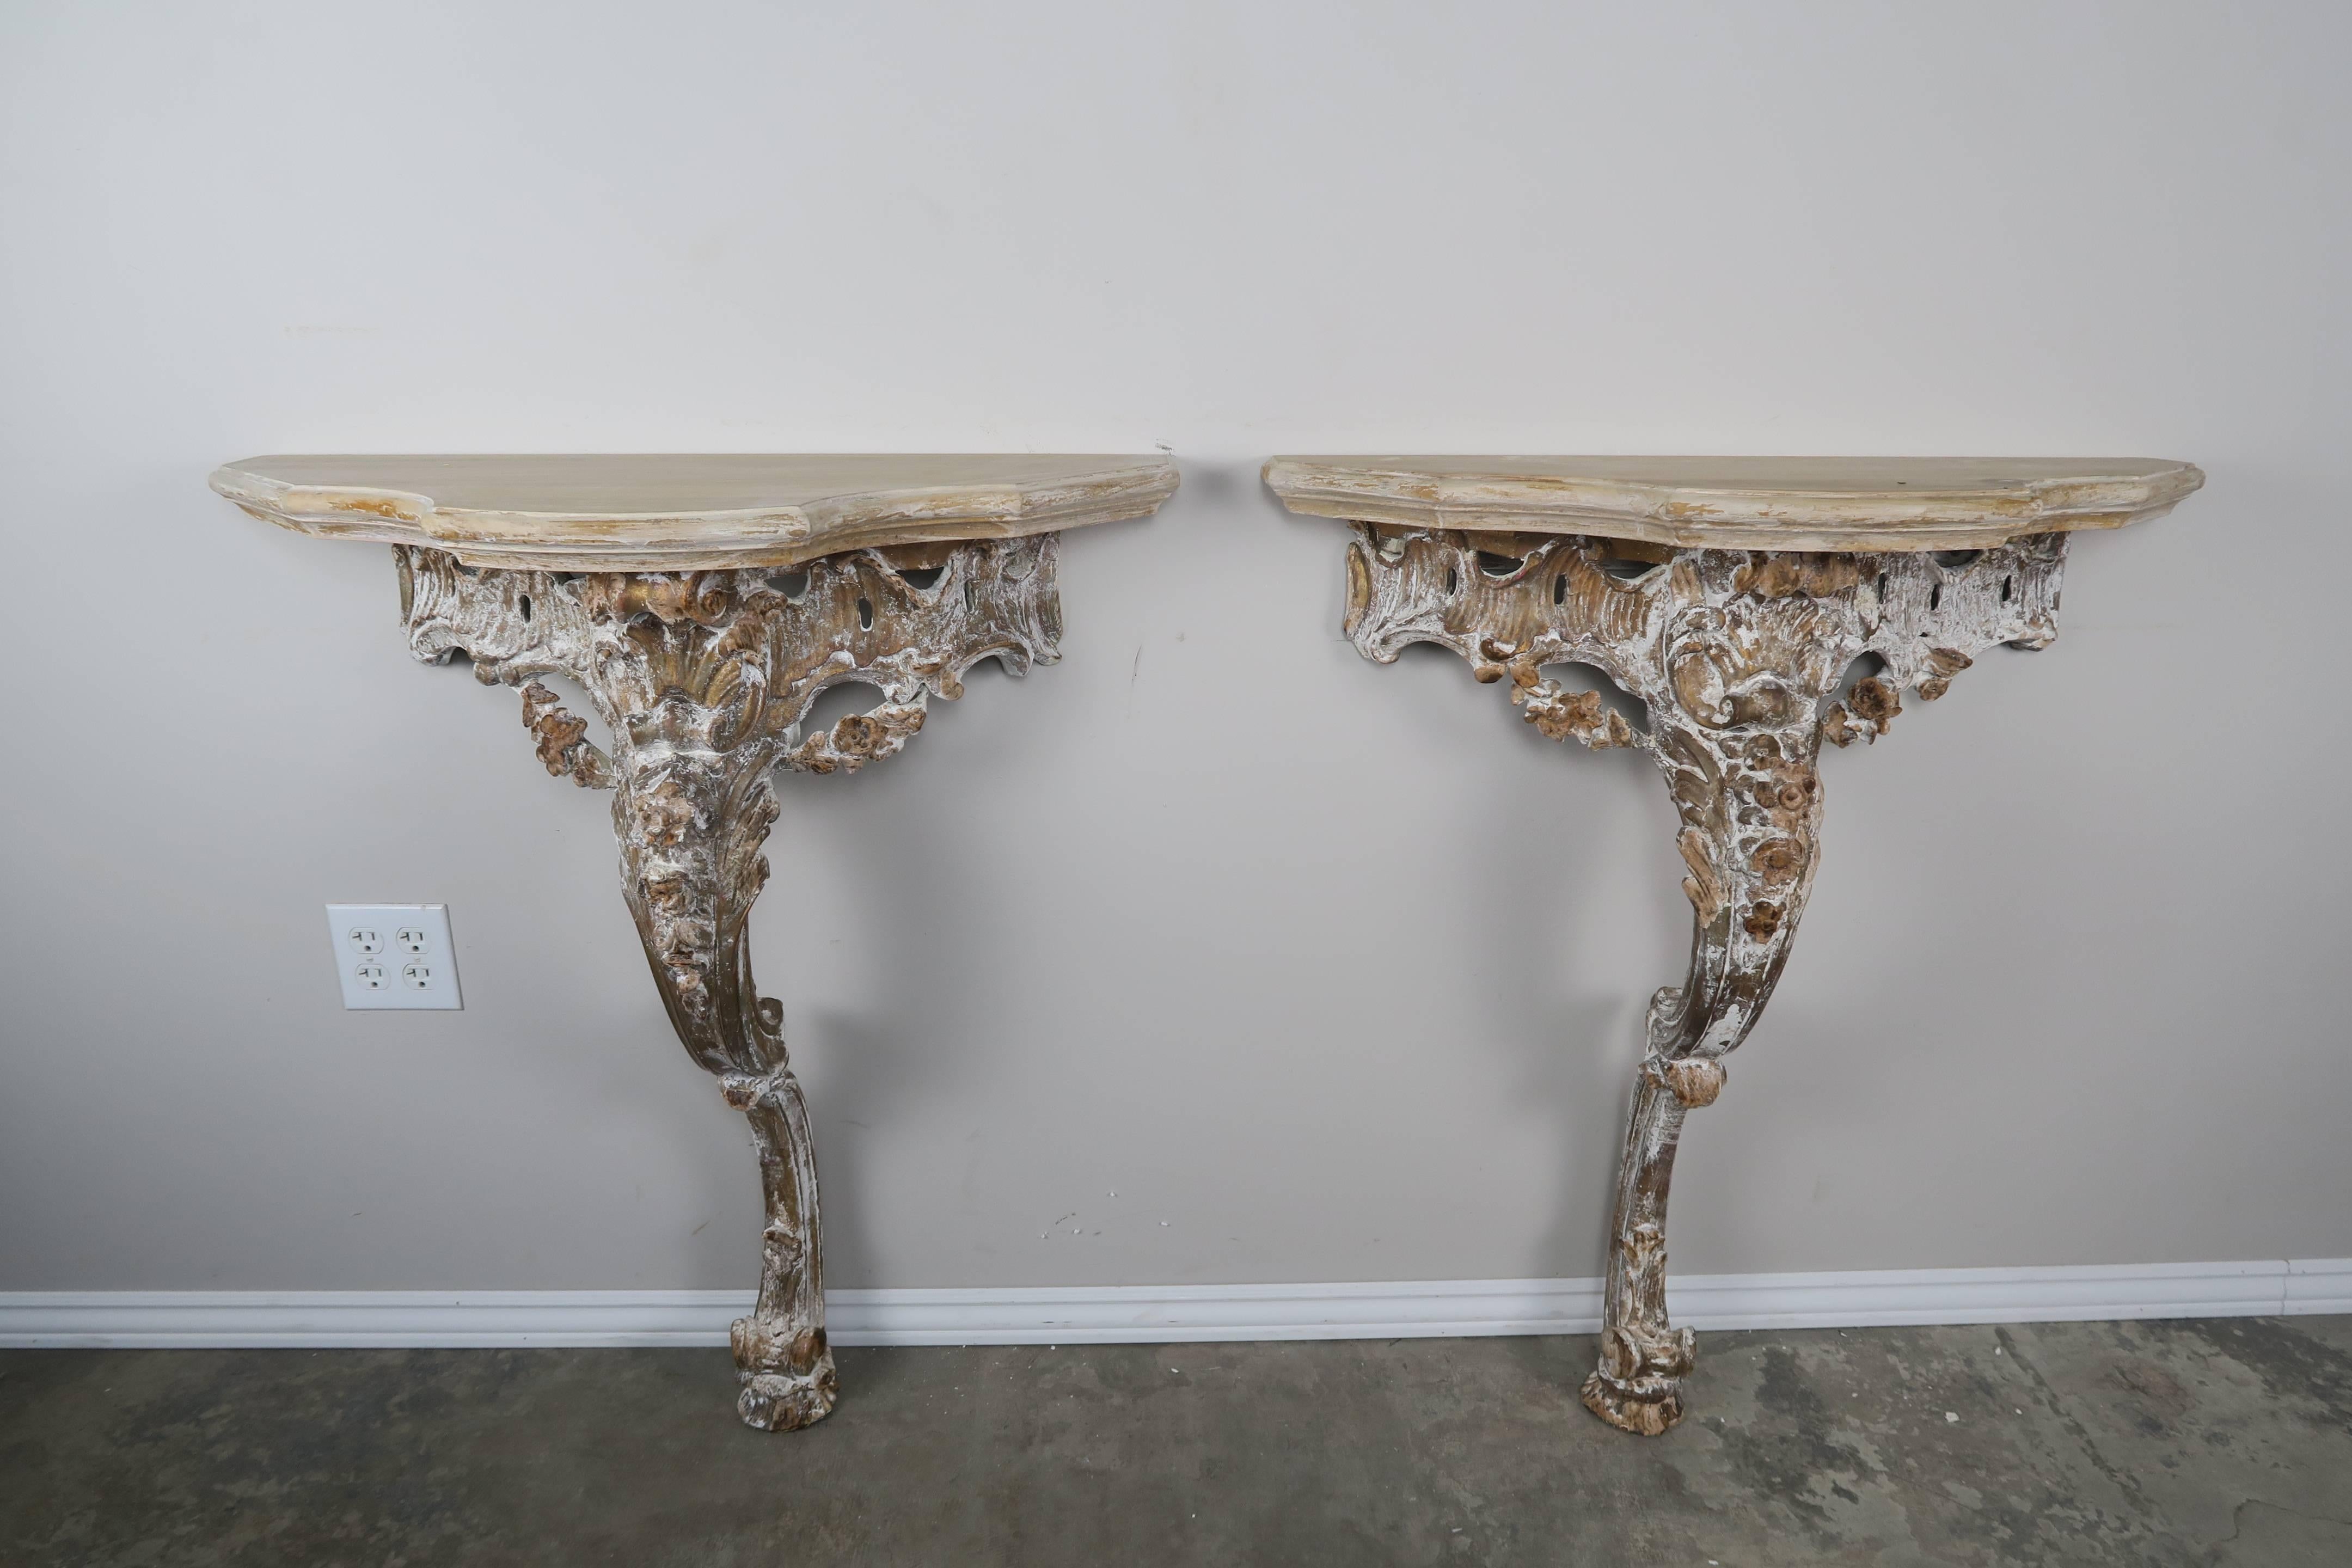 Pair of French Rococo style painted consoles with scalloped tops.